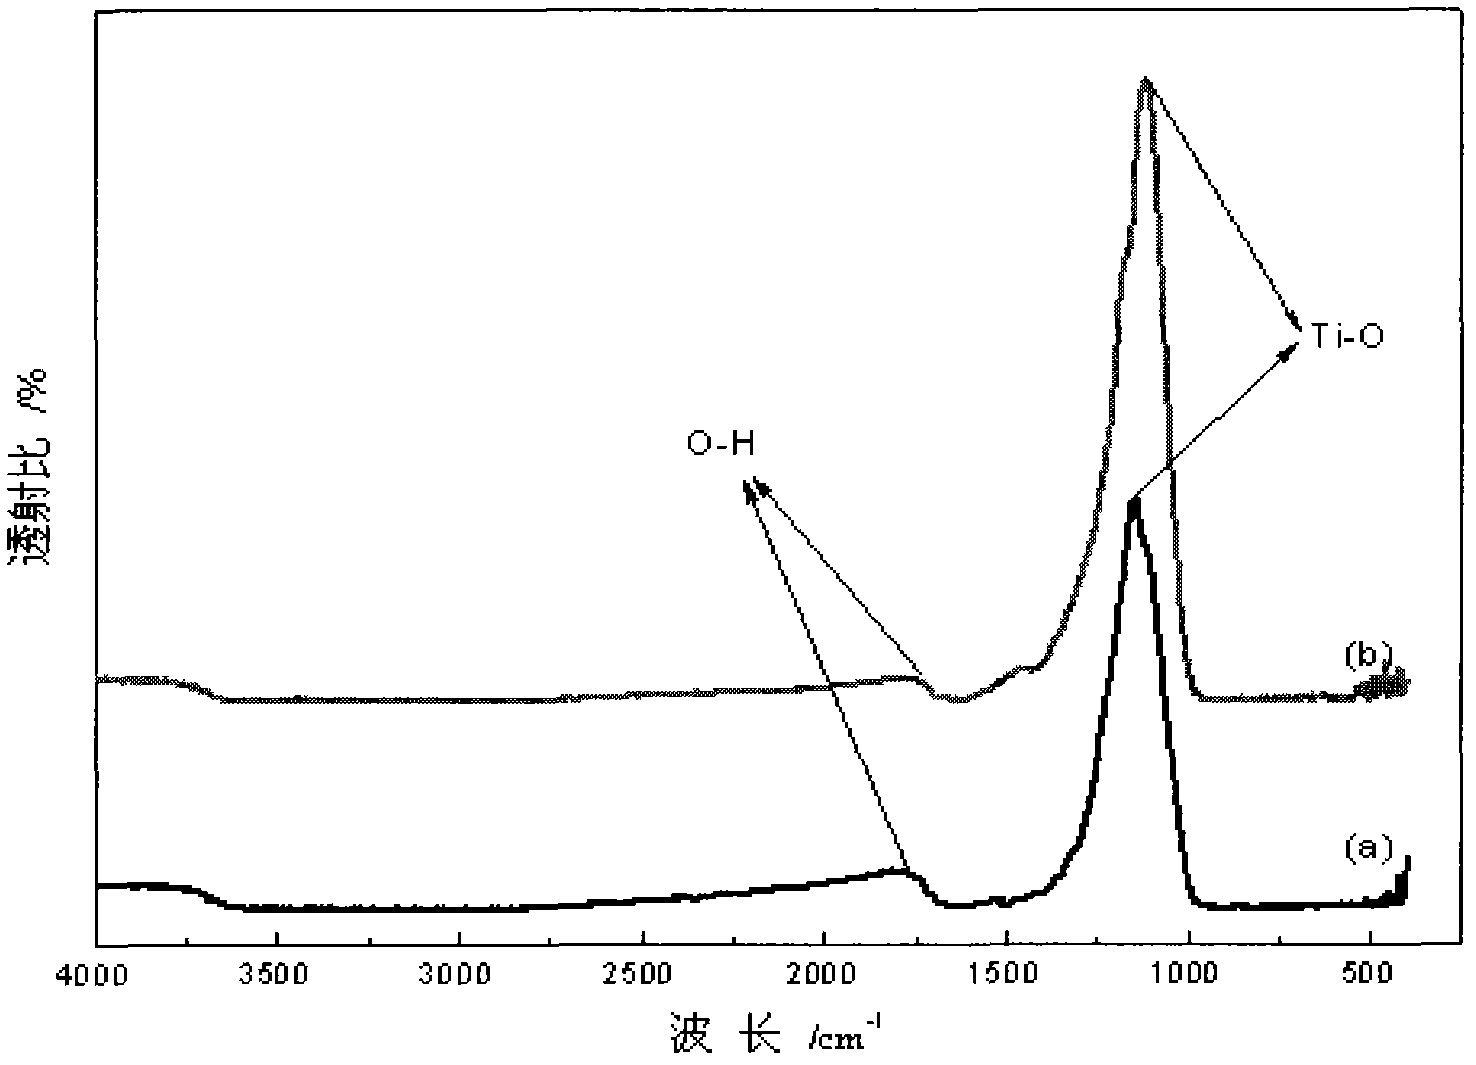 Method for preparing TiO2/PS/Fe3O4 magnetic nanoparticle photocatalyst